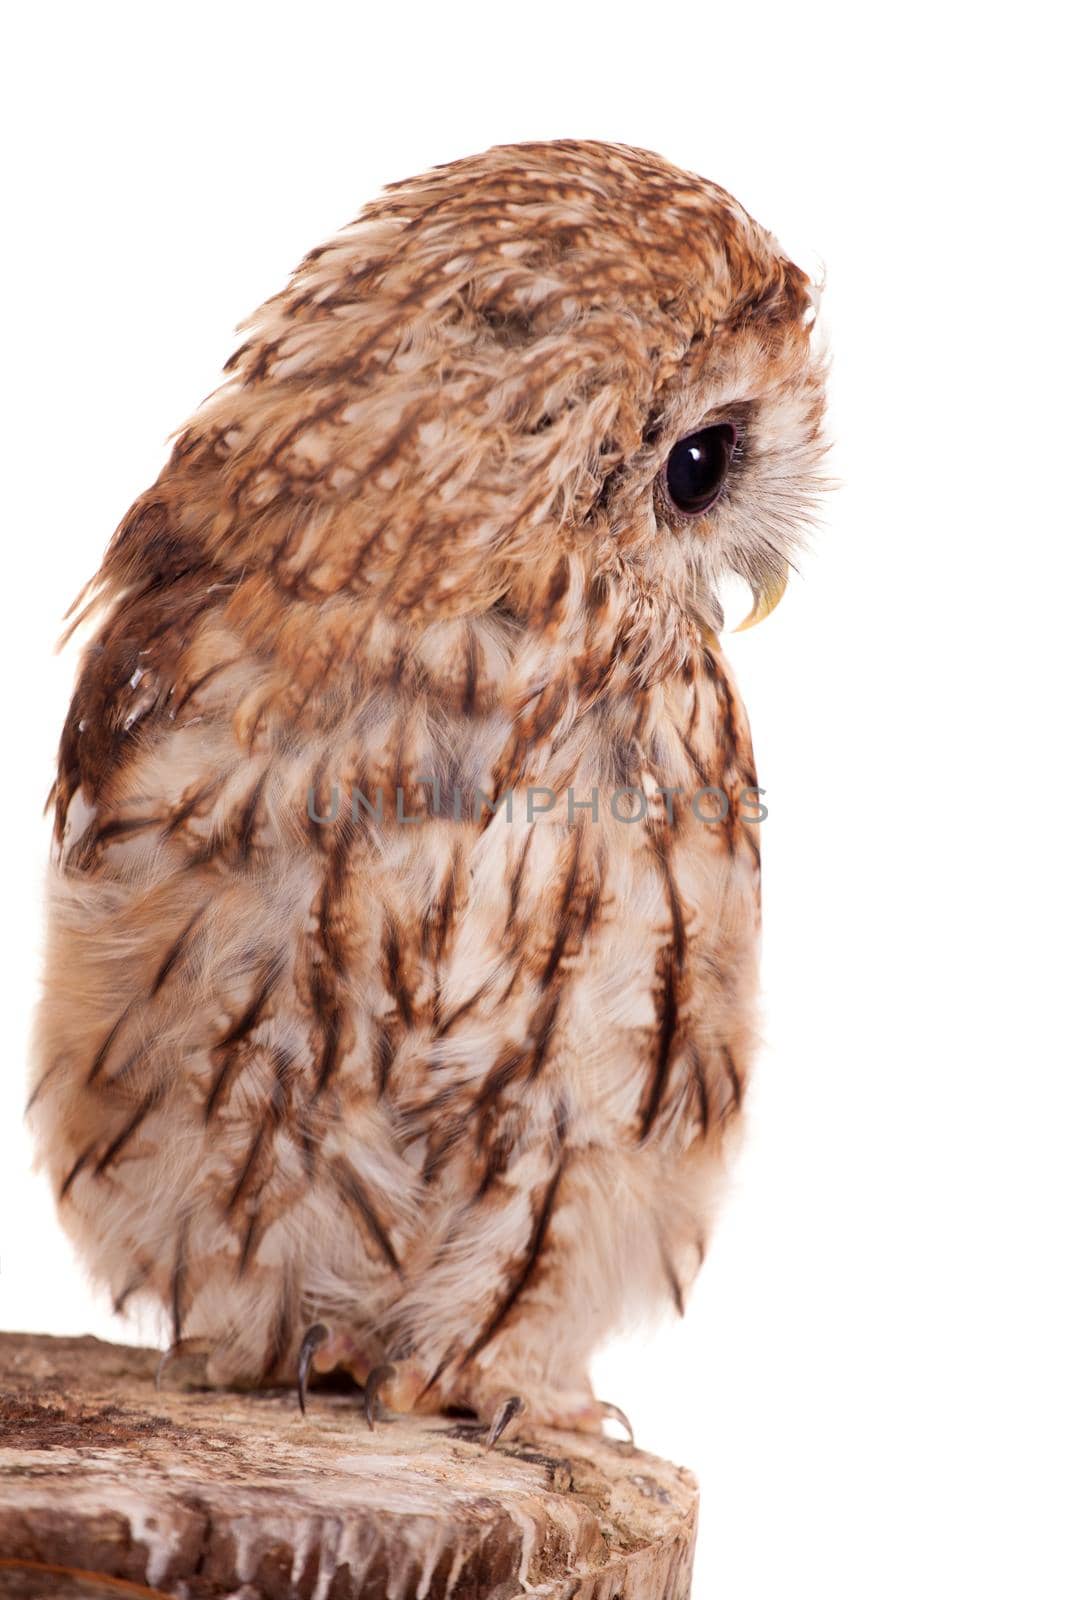 Tawny or Brown Owl isolated on white by RosaJay